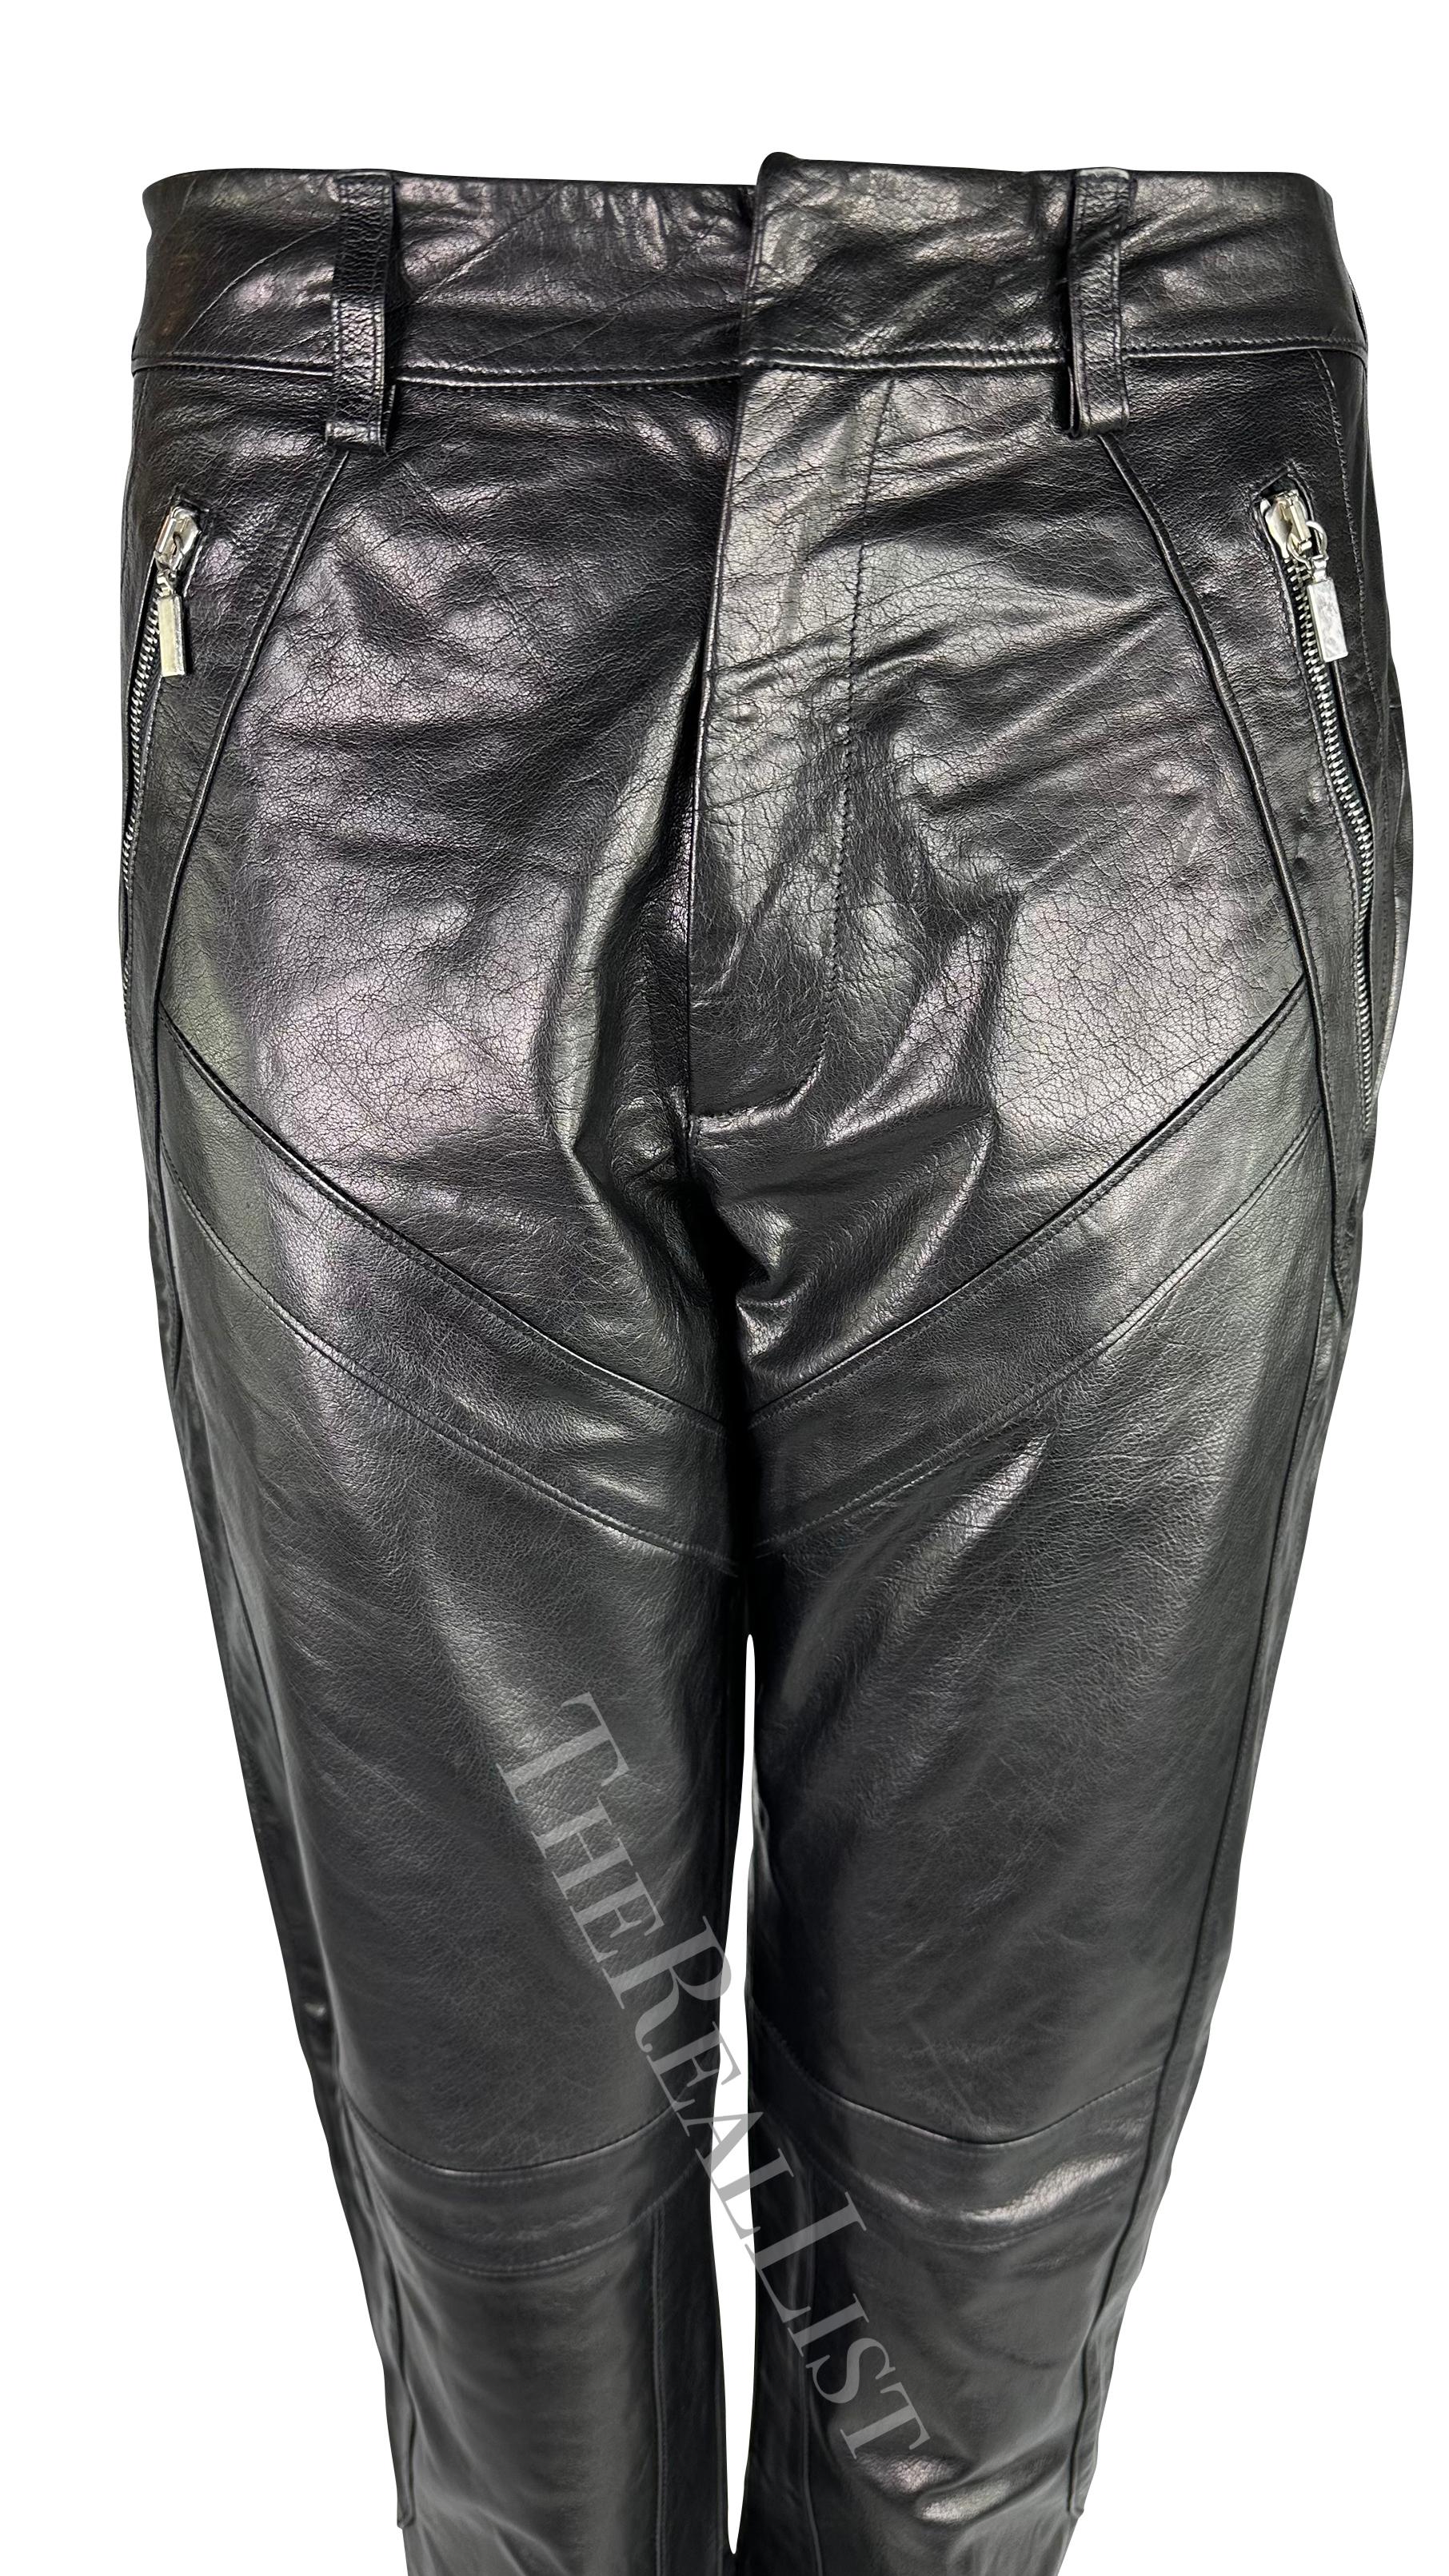 Women's S/S 2002 Gianni Versace by Donatella Black Leather Moto Style Zip Pants For Sale